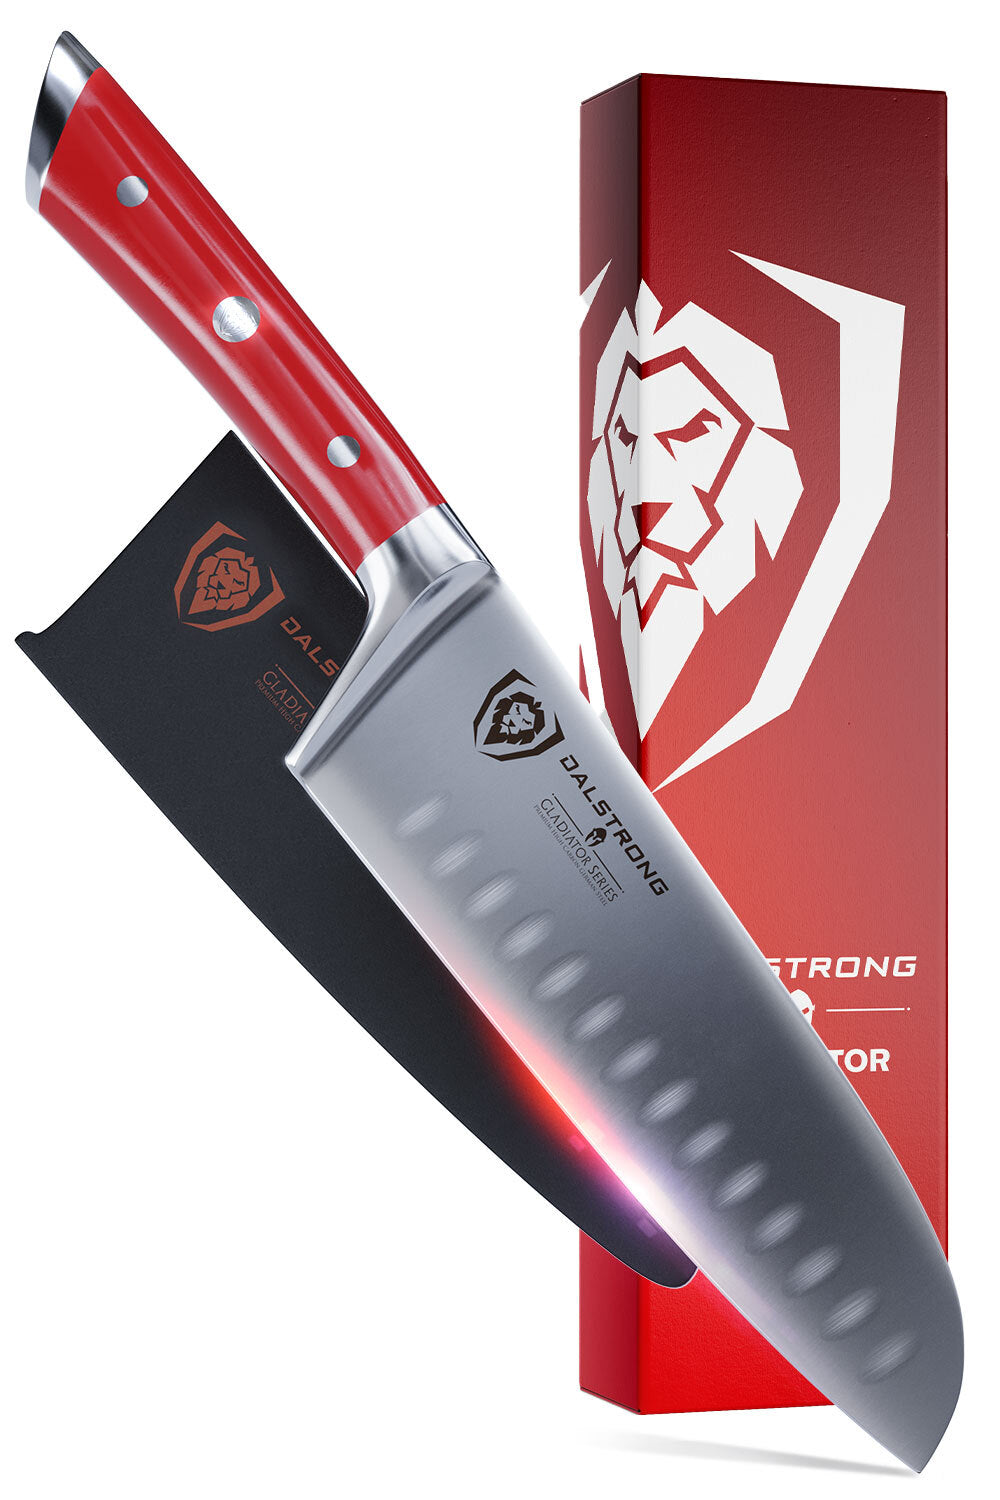 Dalstrong gladiator series 7 inch santoku knife with red handle in front of it's premium packaging.